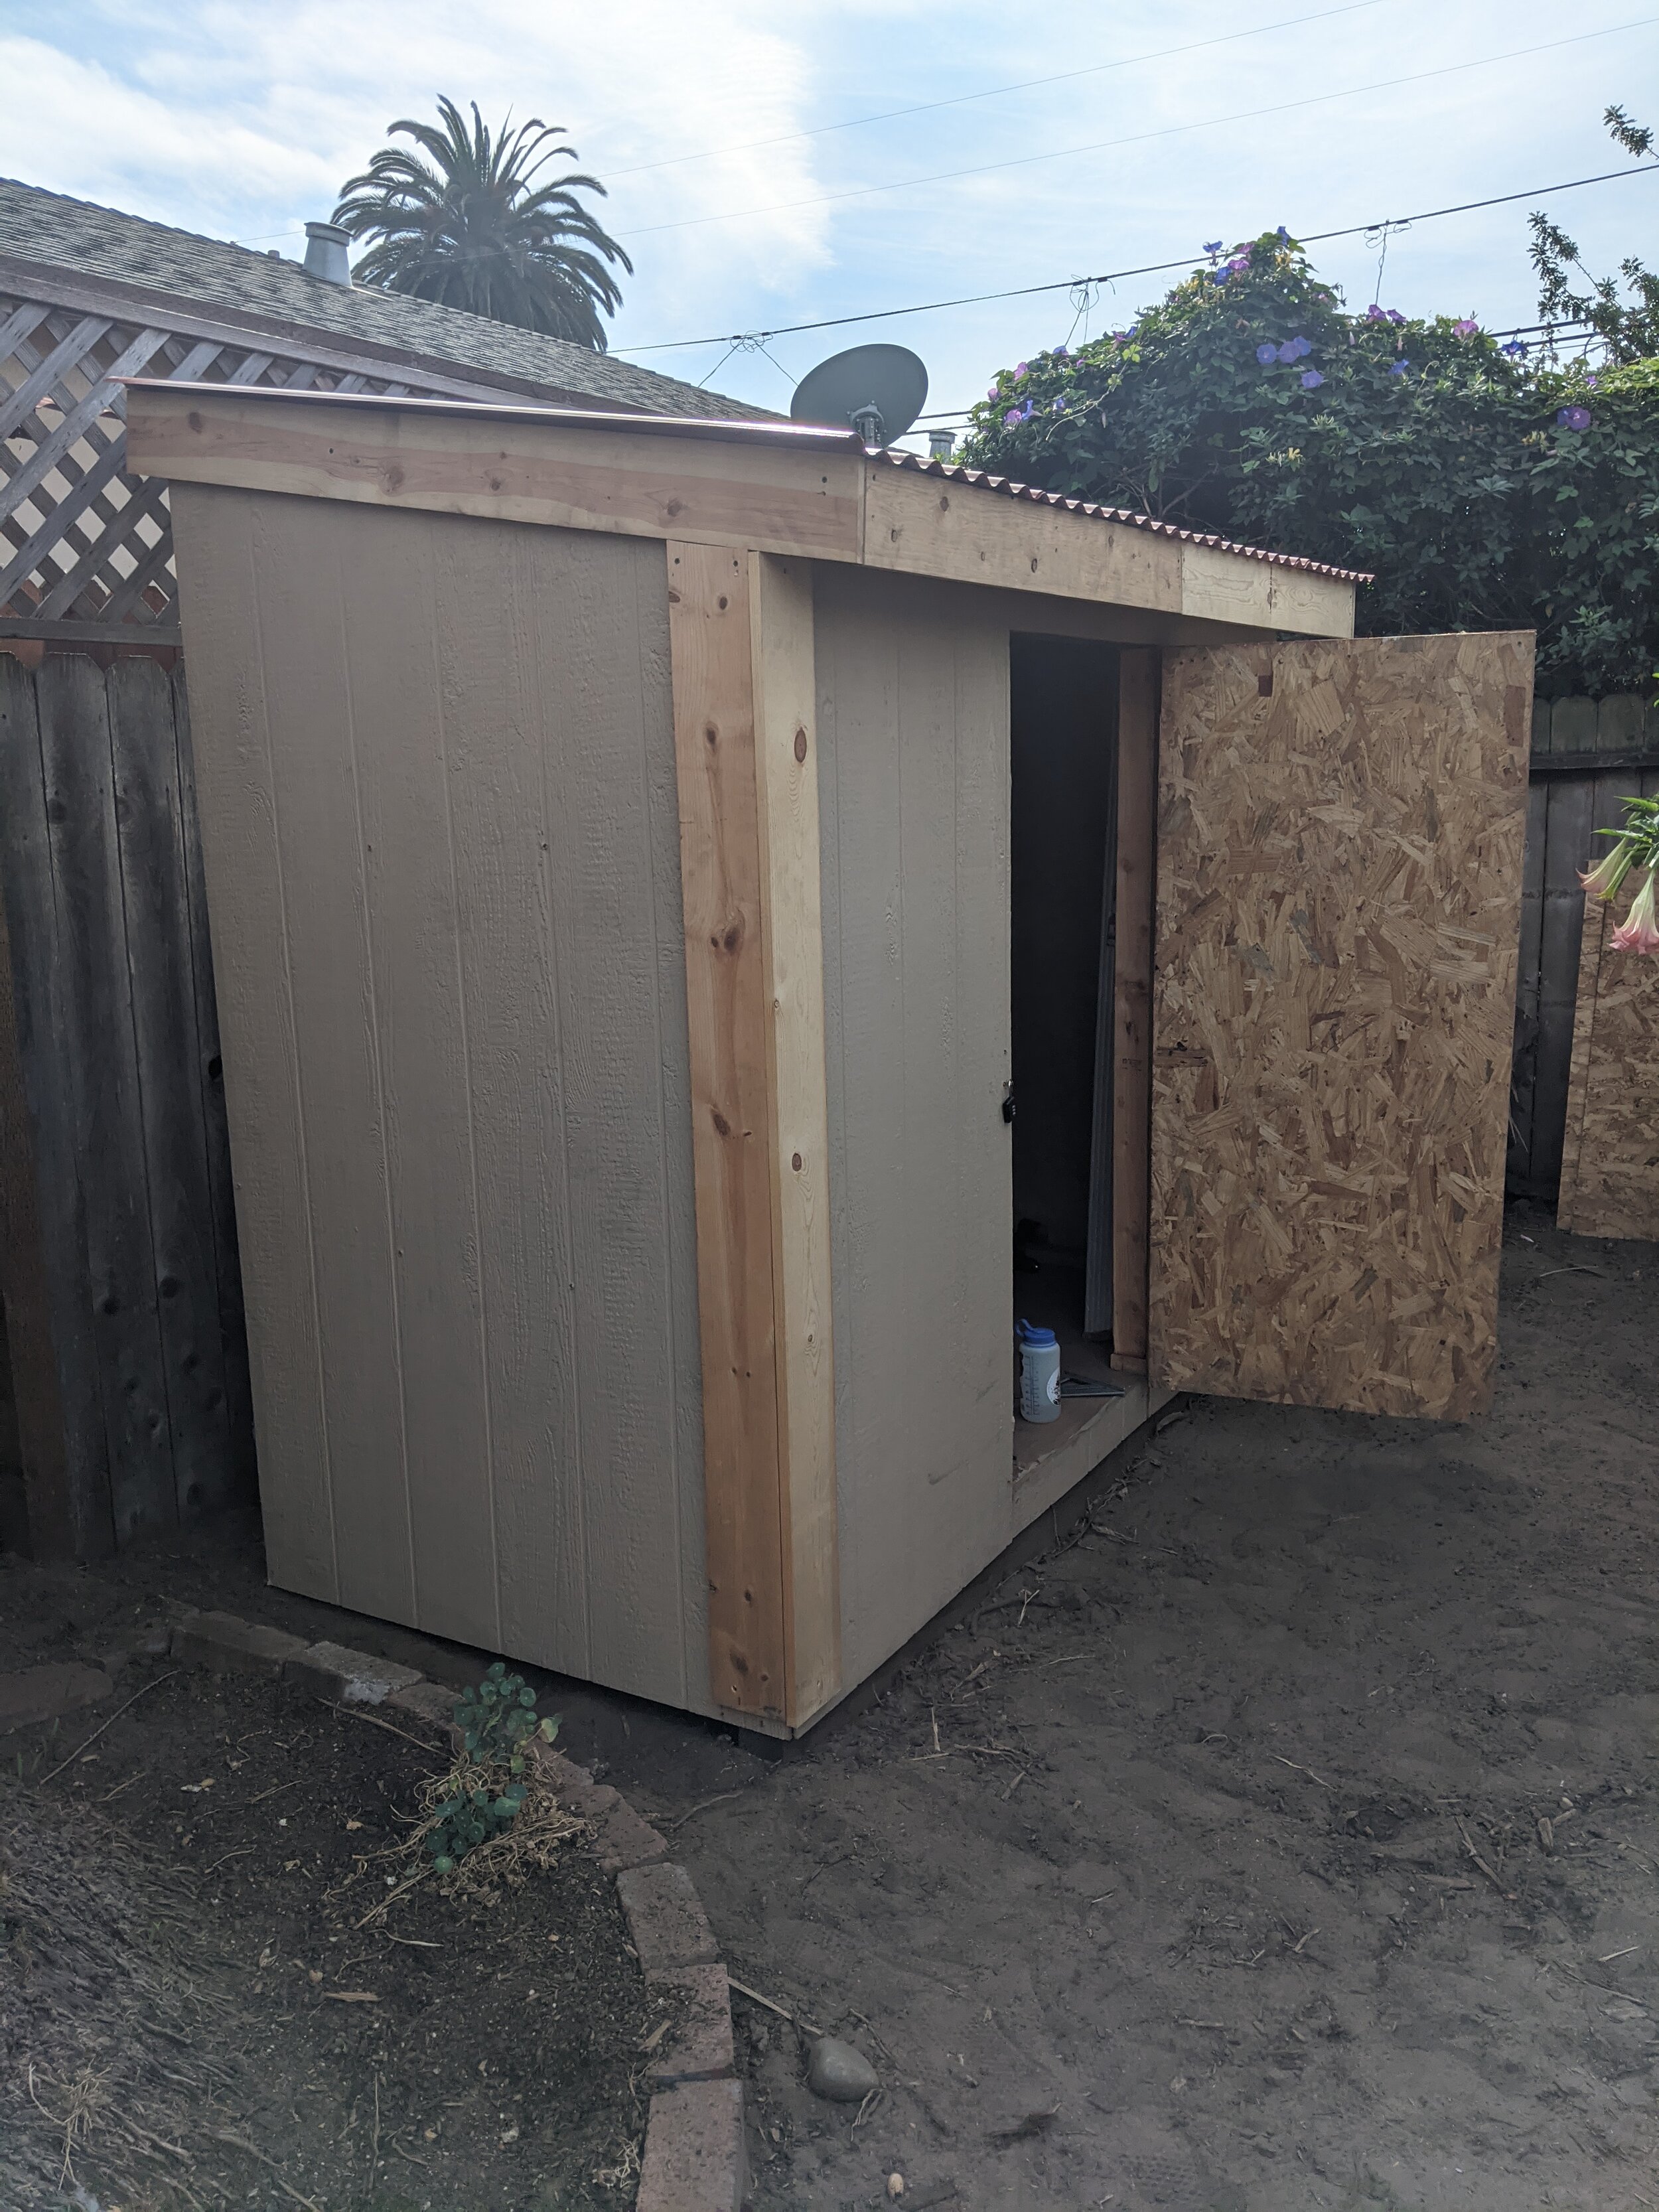  At this point I had the front corner trim installed. Also note the door, which was built from scrap: two sheets of OSB plywood attached to a simple 2 x 4 frame. 